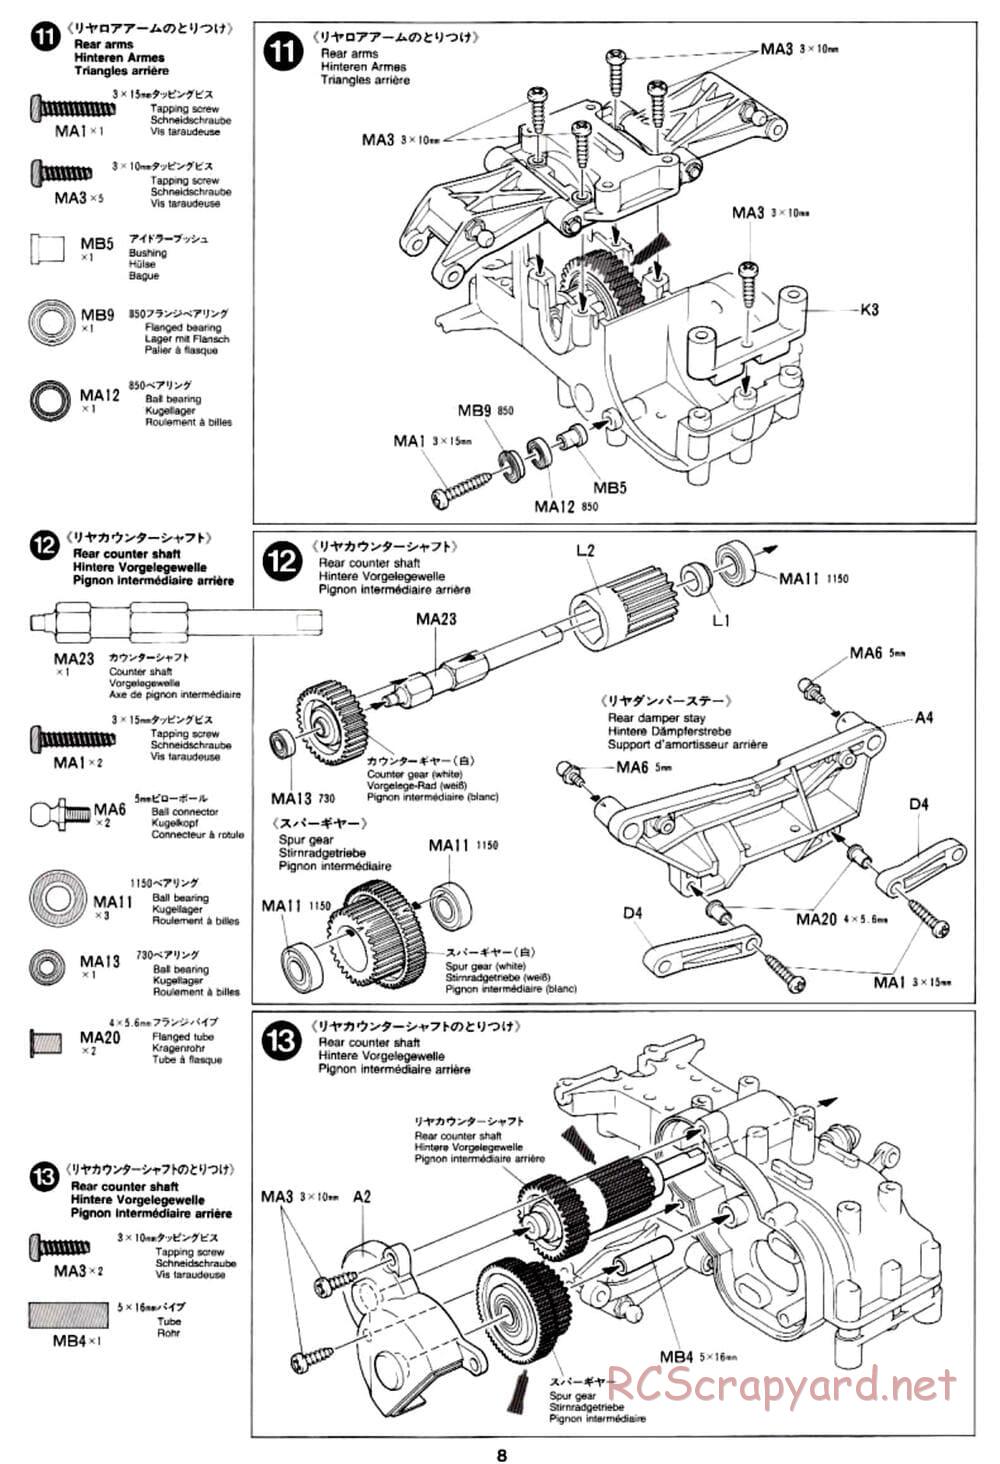 Tamiya - TA-03R TRF Special Edition Chassis - Manual - Page 8